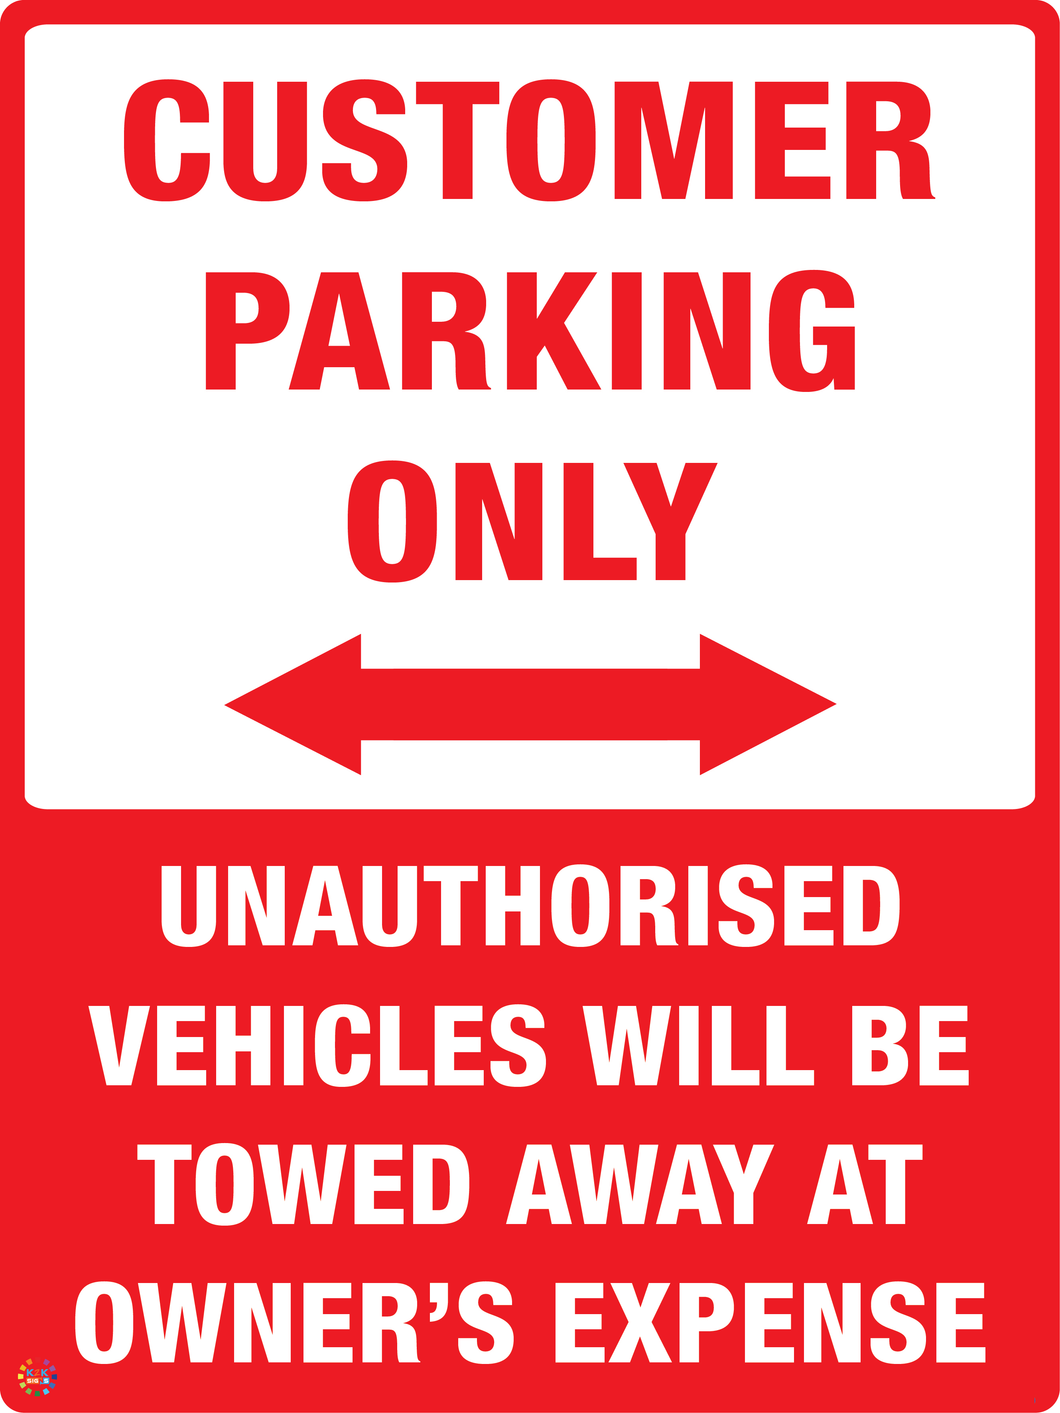 Customer Parking Only (Two Way Arrow) Sign